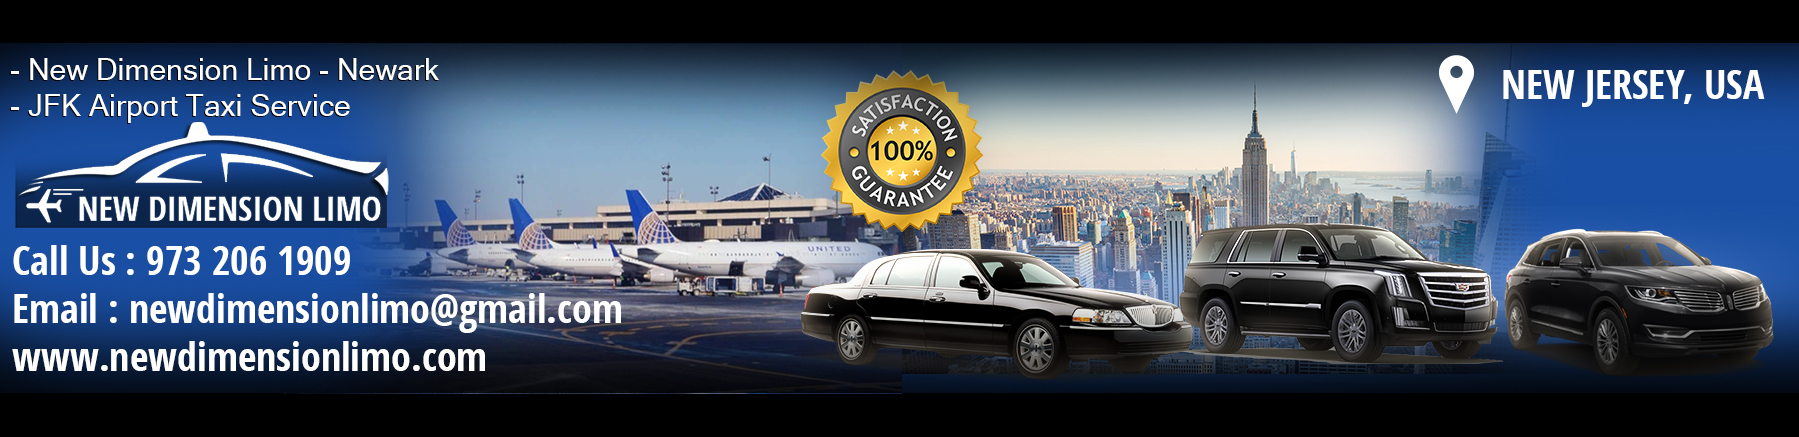 New Dimension Limo - Newark|JFK Airport Taxi Service